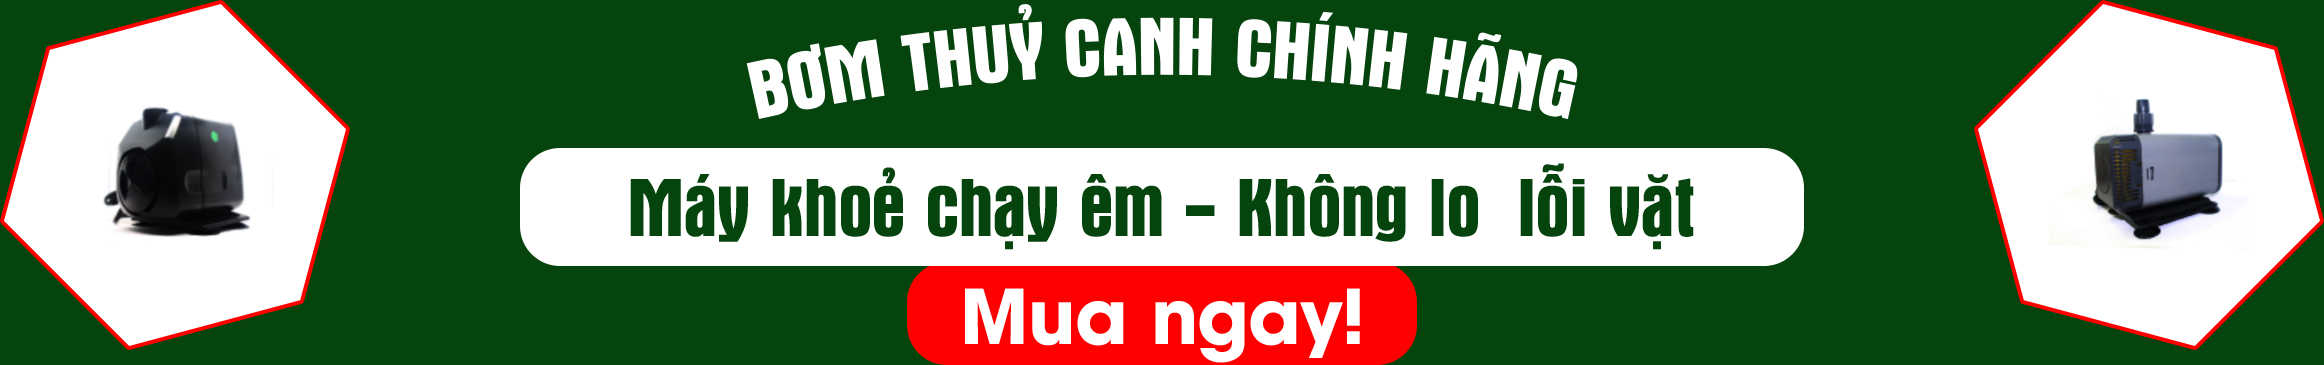 may-bom-thuy-canh-may-khoe-chay-em